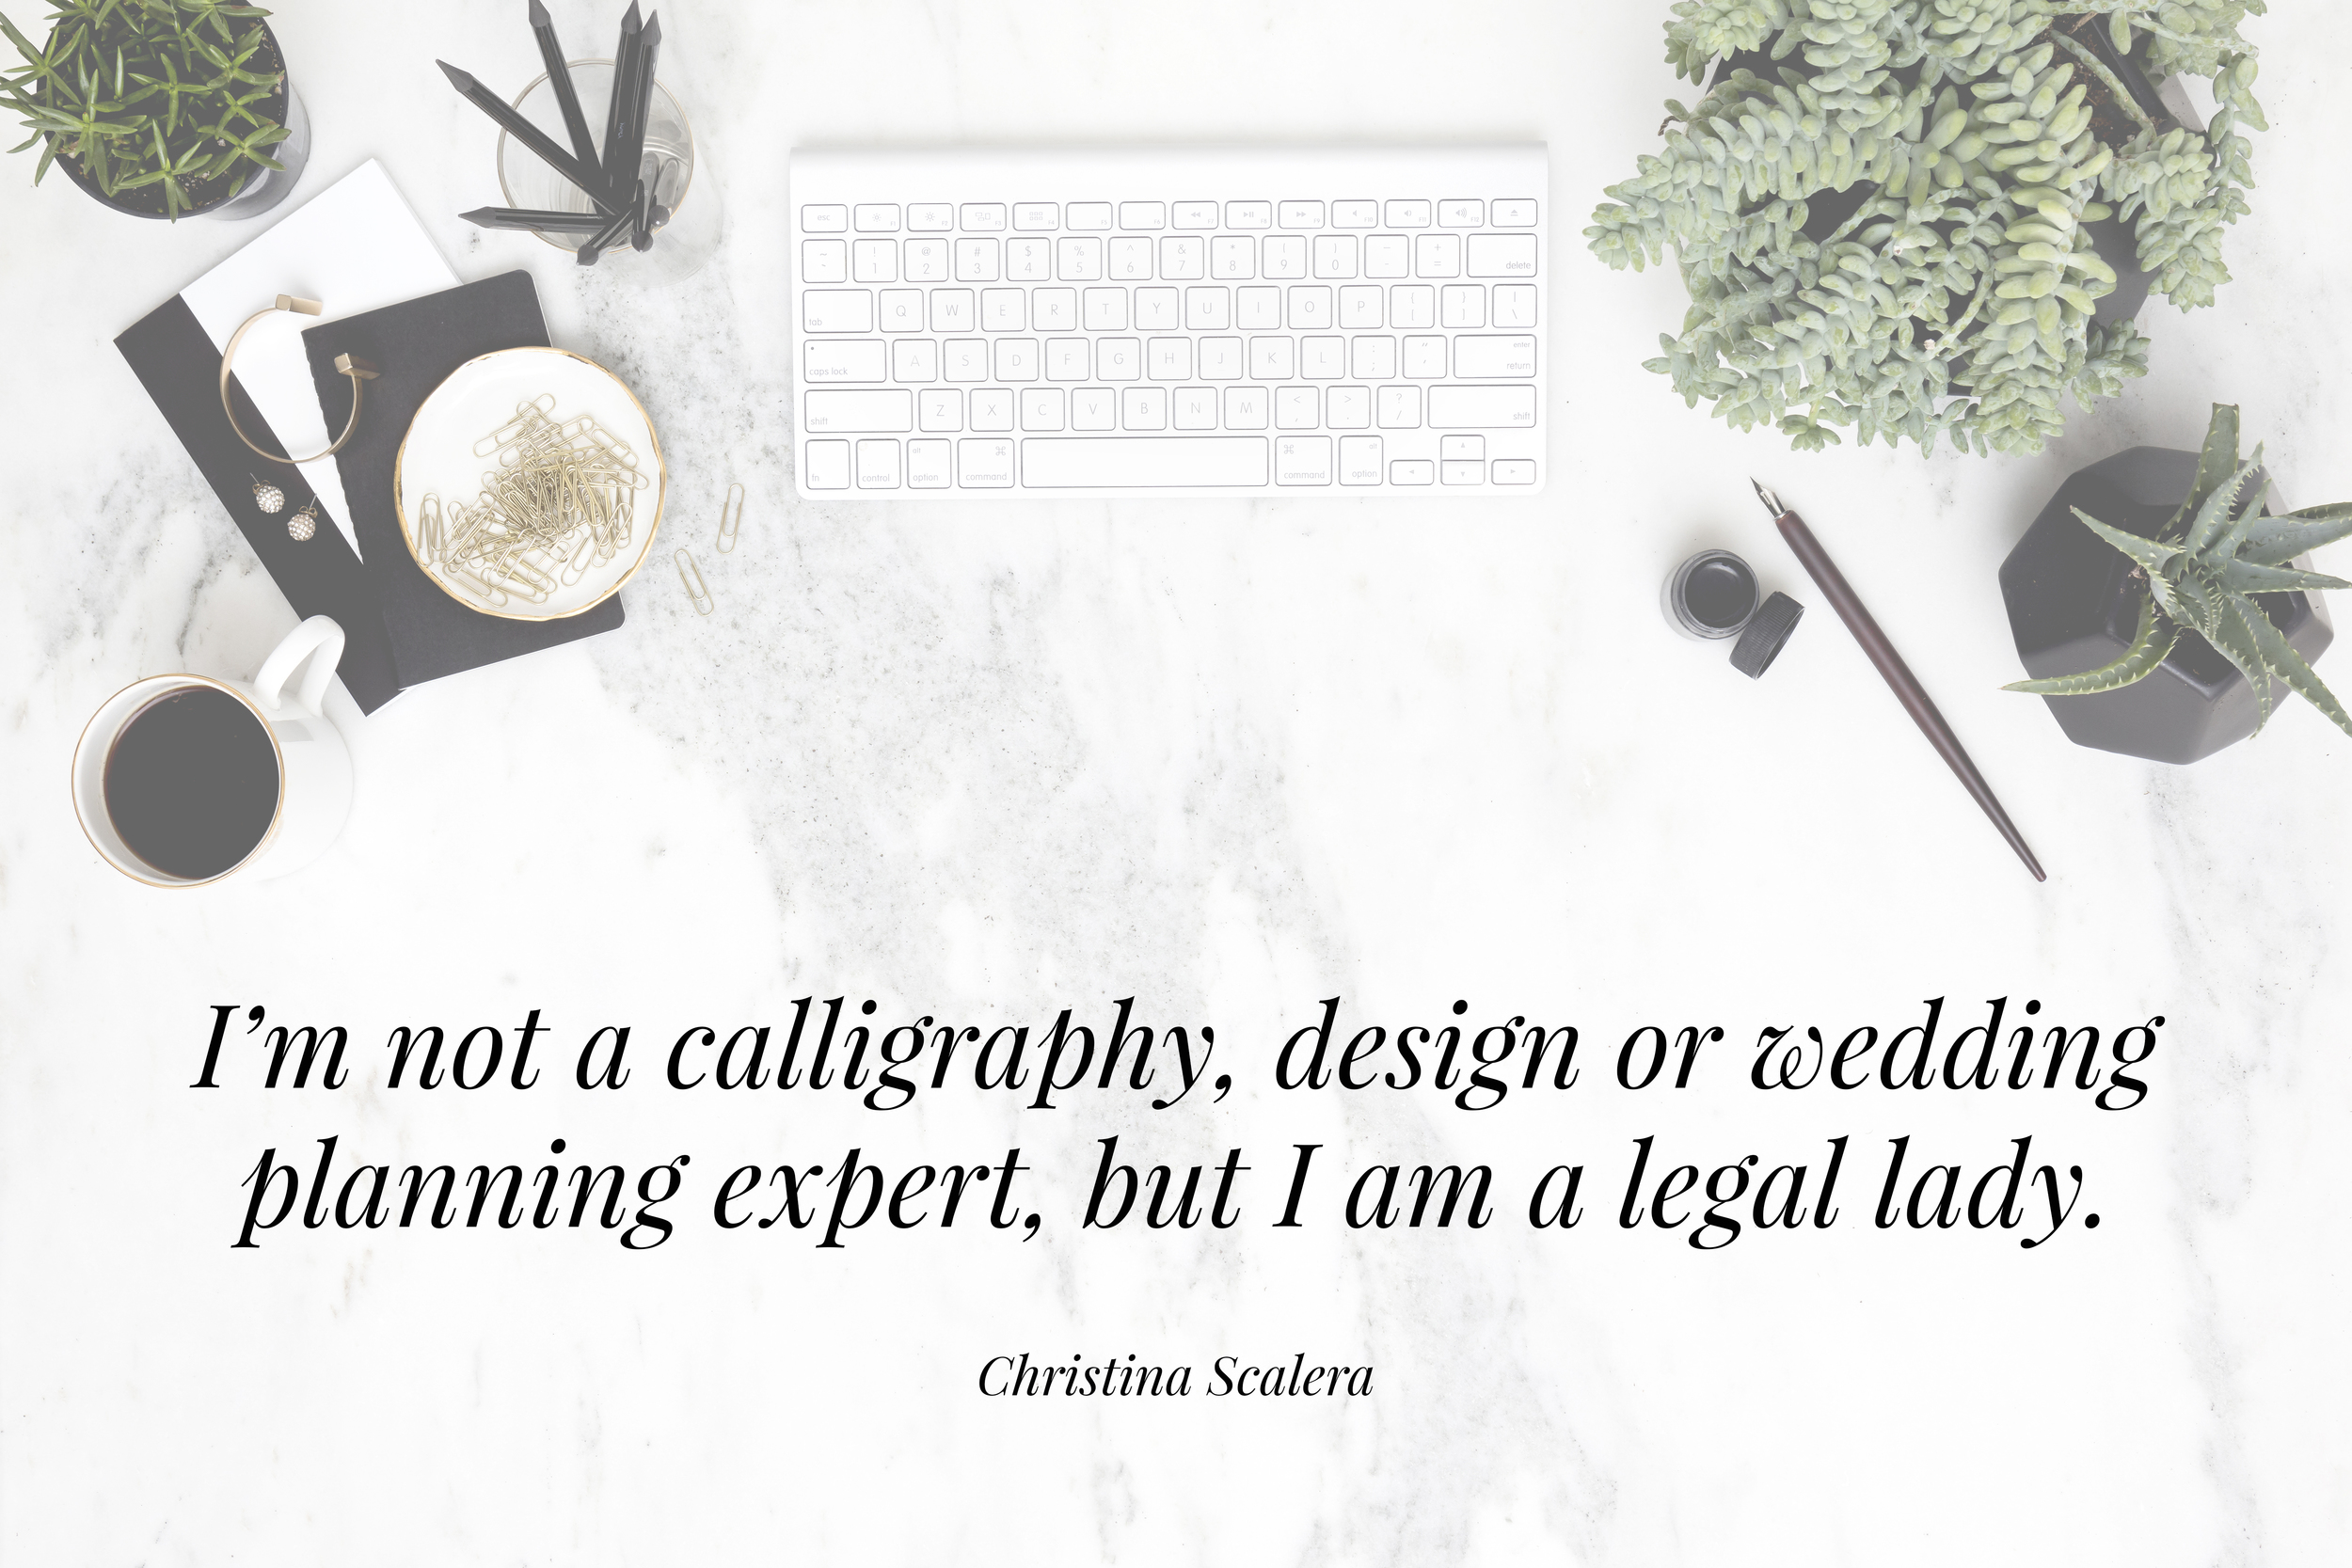   Christina Scalera  | Legal advice for creatives | The School of Styling -  theschoolofstyling.com  | Creative Business Crash Course 